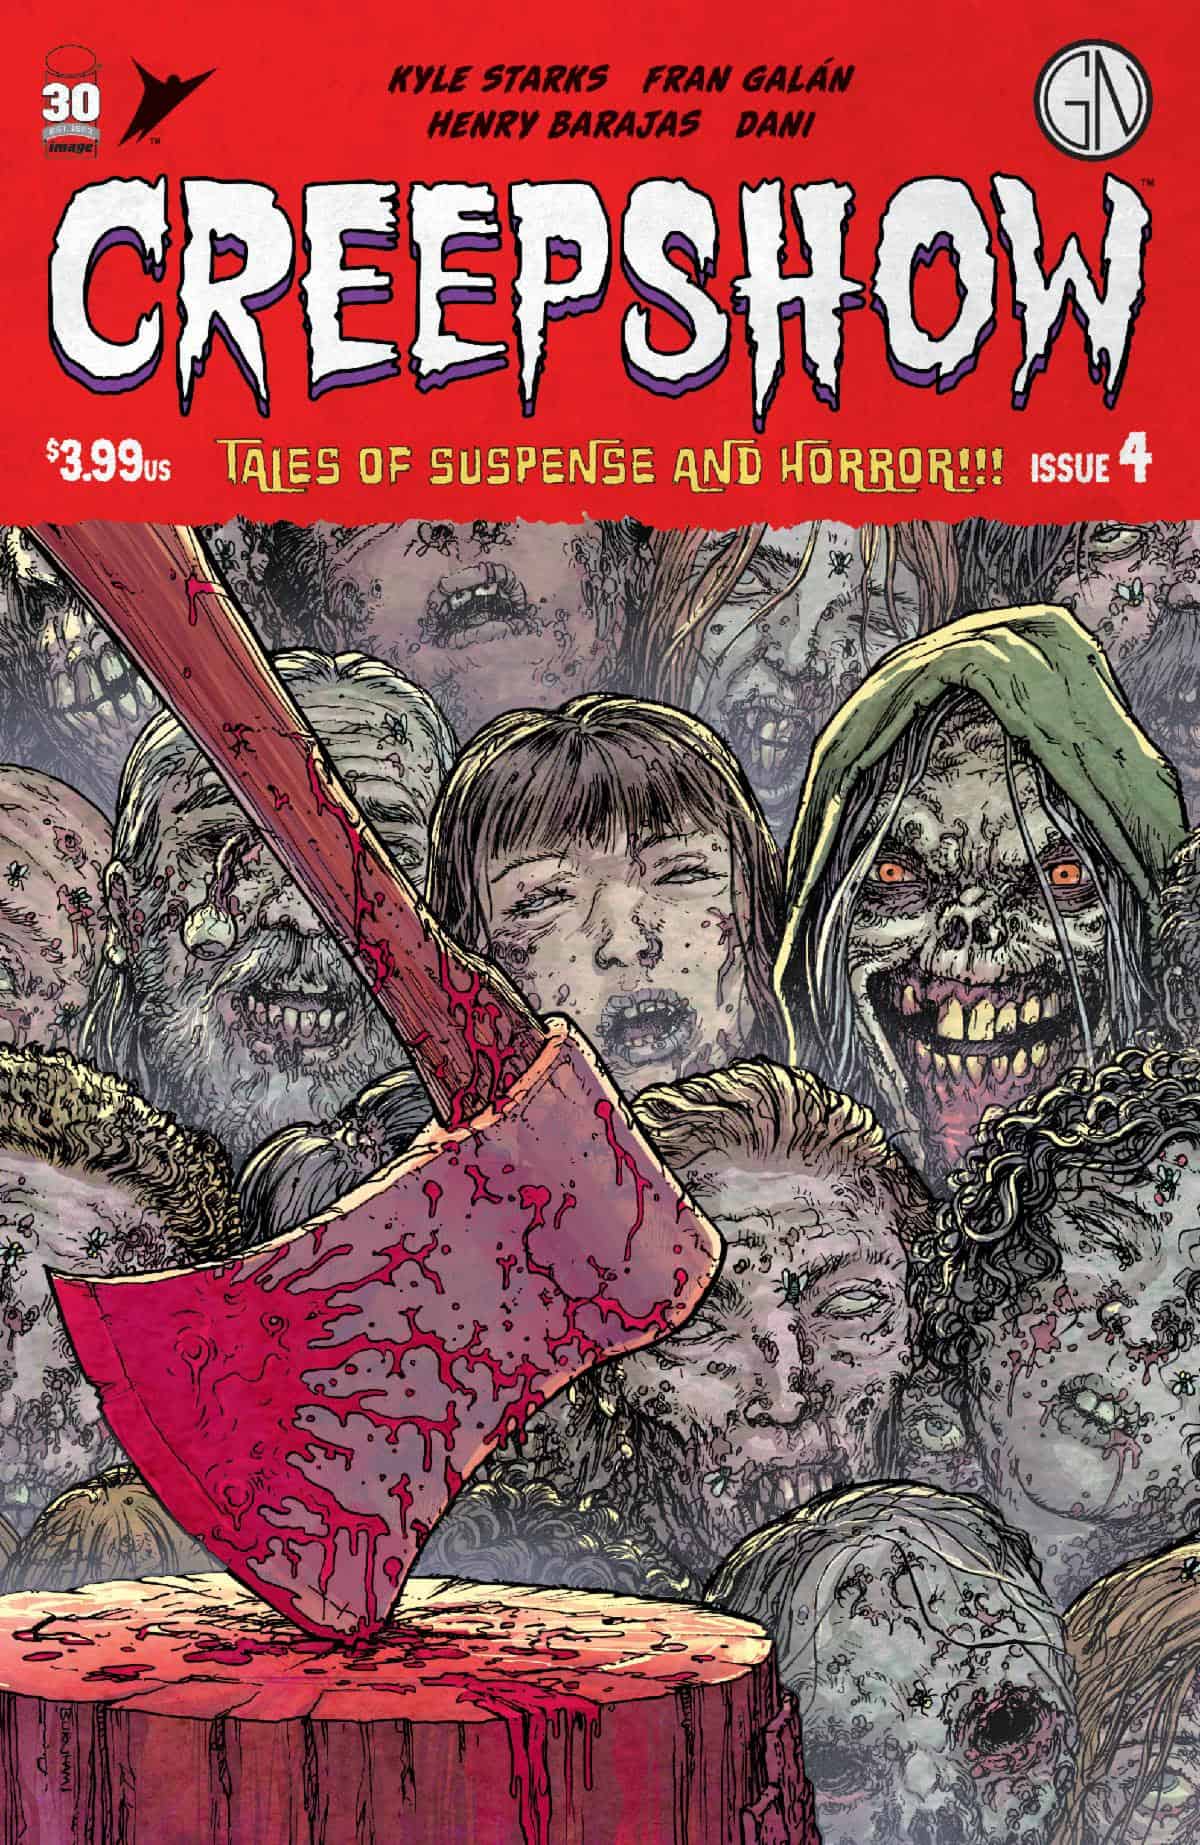 NEWS WATCH: First Look: Skybound’s CREEPSHOW #4 Grapples with Vampires and Luchadors